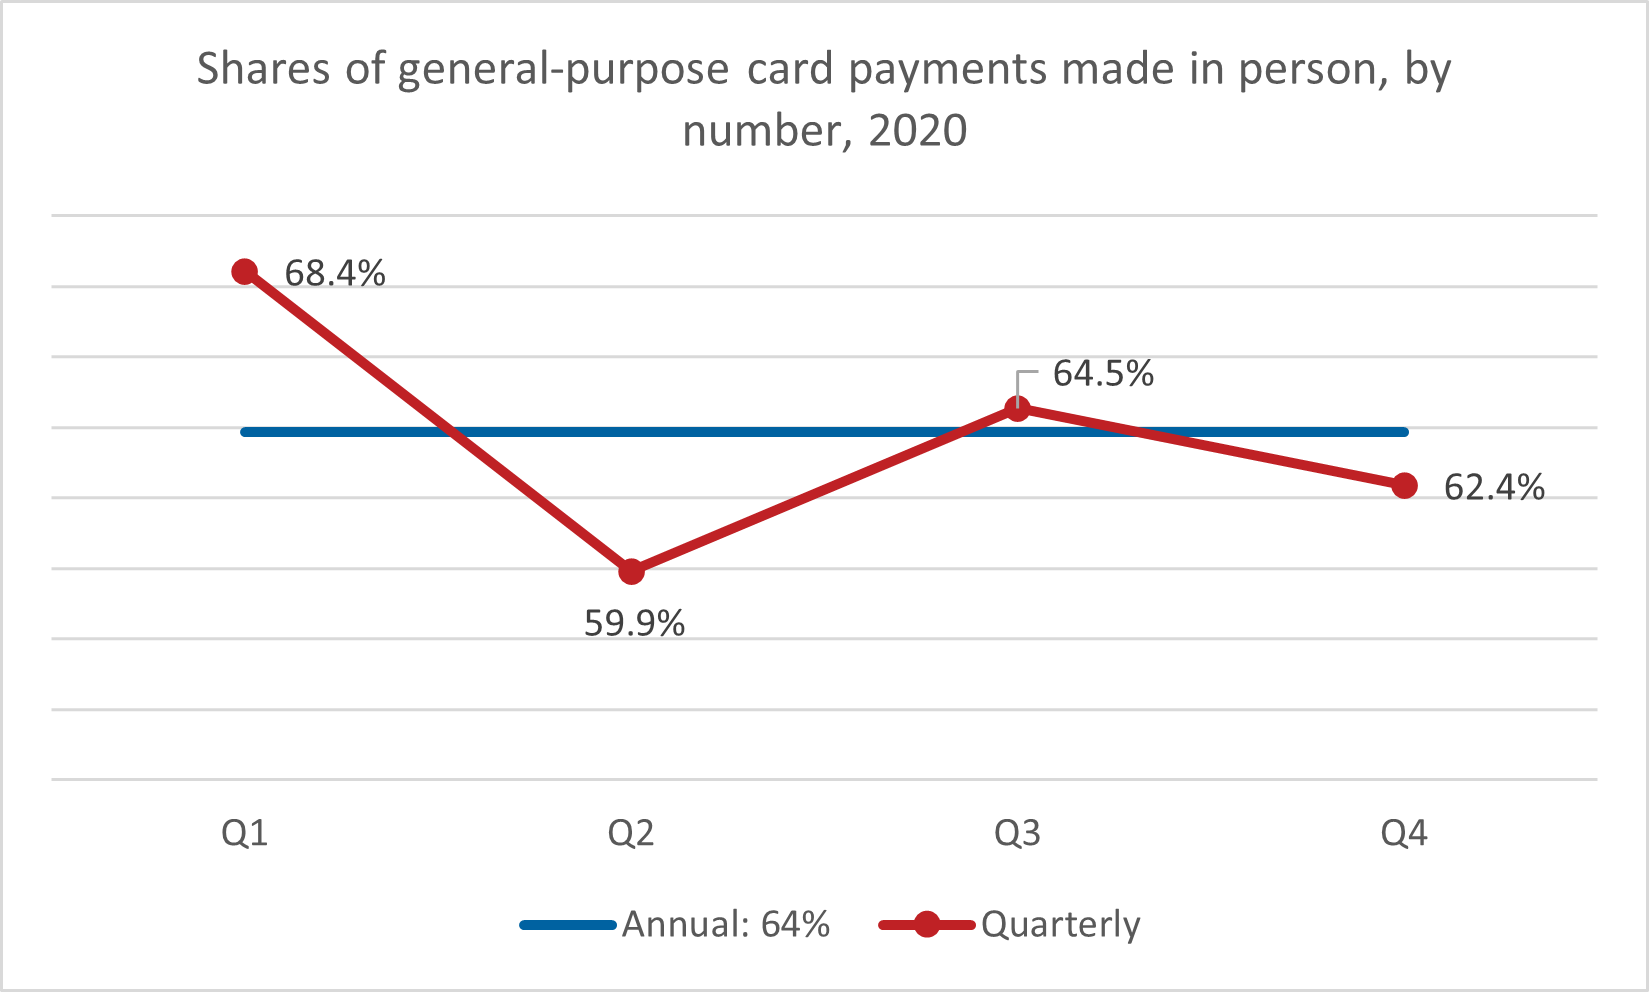 chart 01 of 01: Shares of general-purpose card payments made in person by number